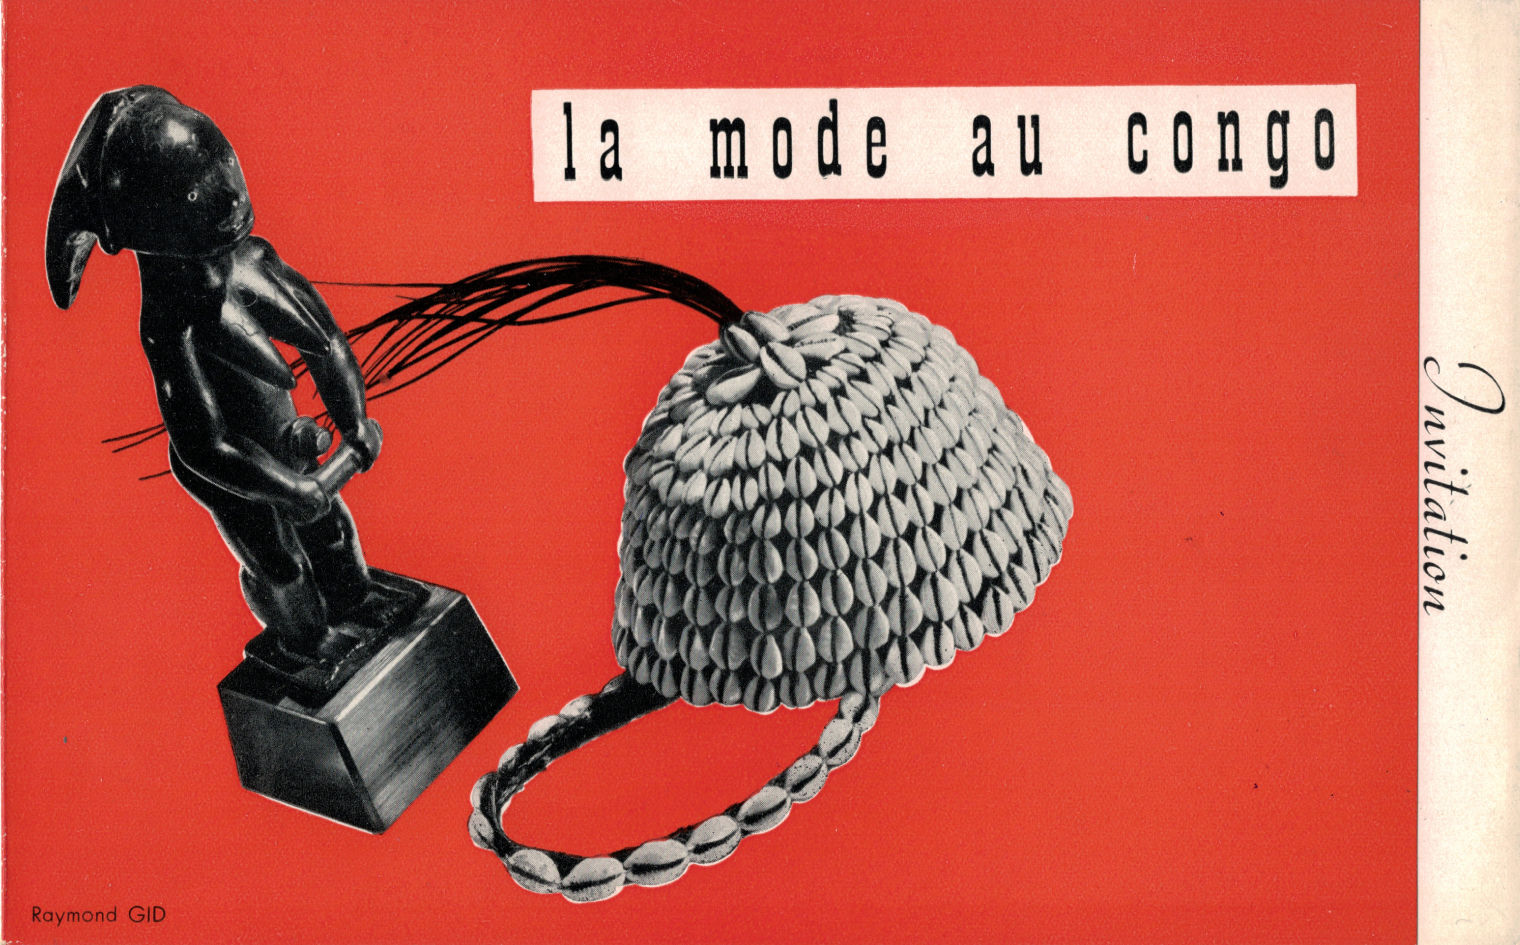 Invitation to La Mode au Congo at the Charles Ration gallery showcasing a bright red background, a sculpture, and a hat decorated with shells